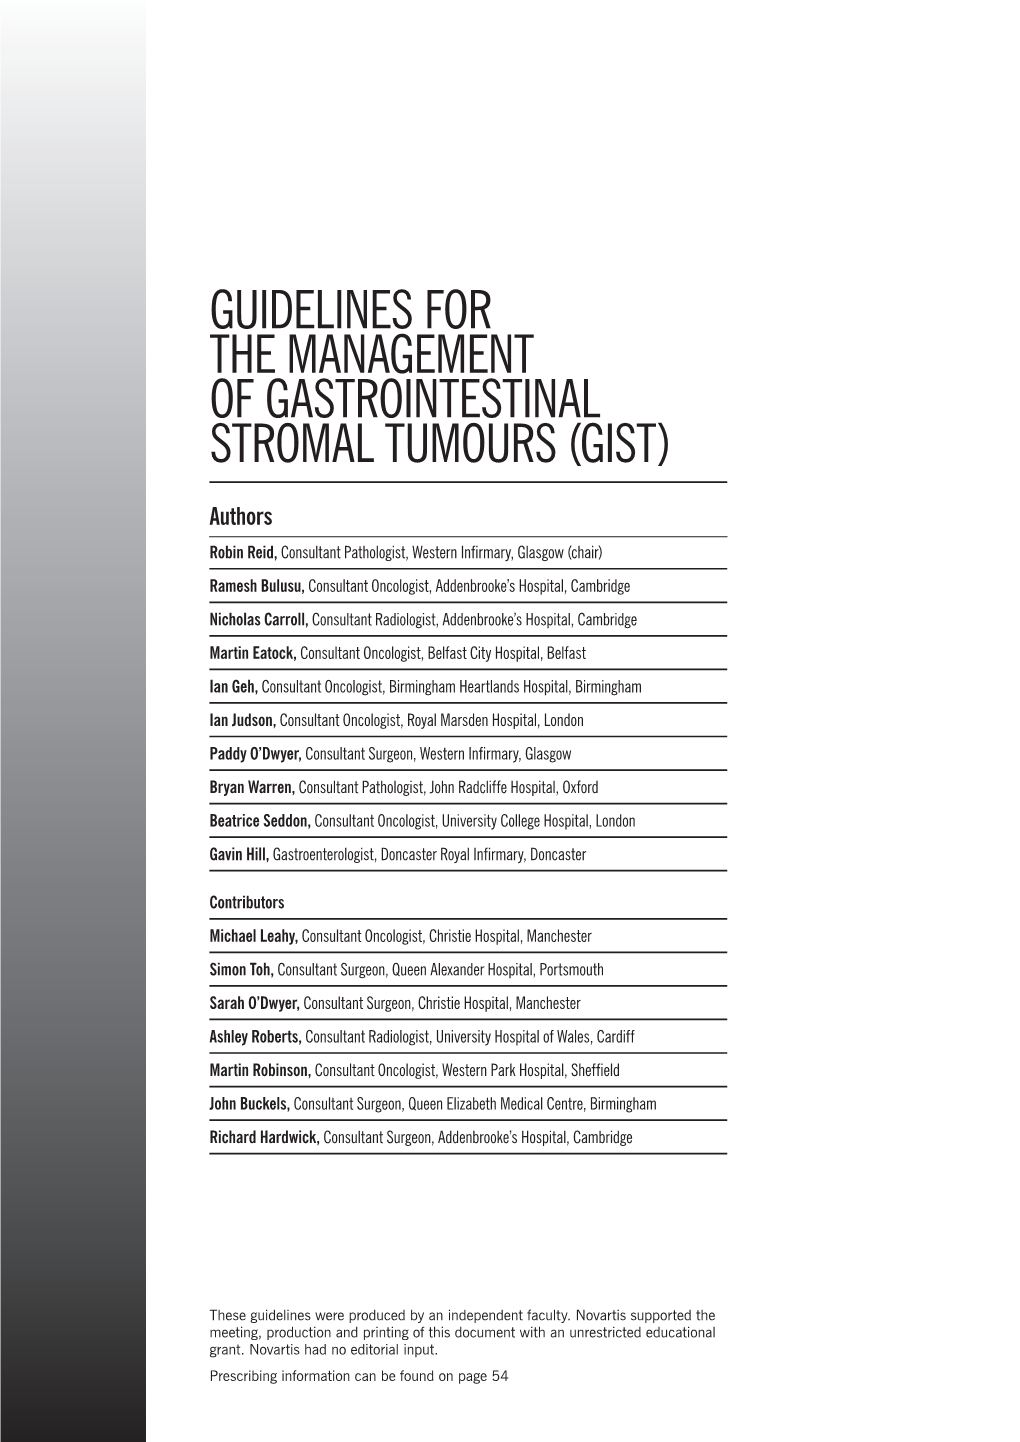 Guidelines for the Management of Gastrointestinal Stromal Tumours (GIST)